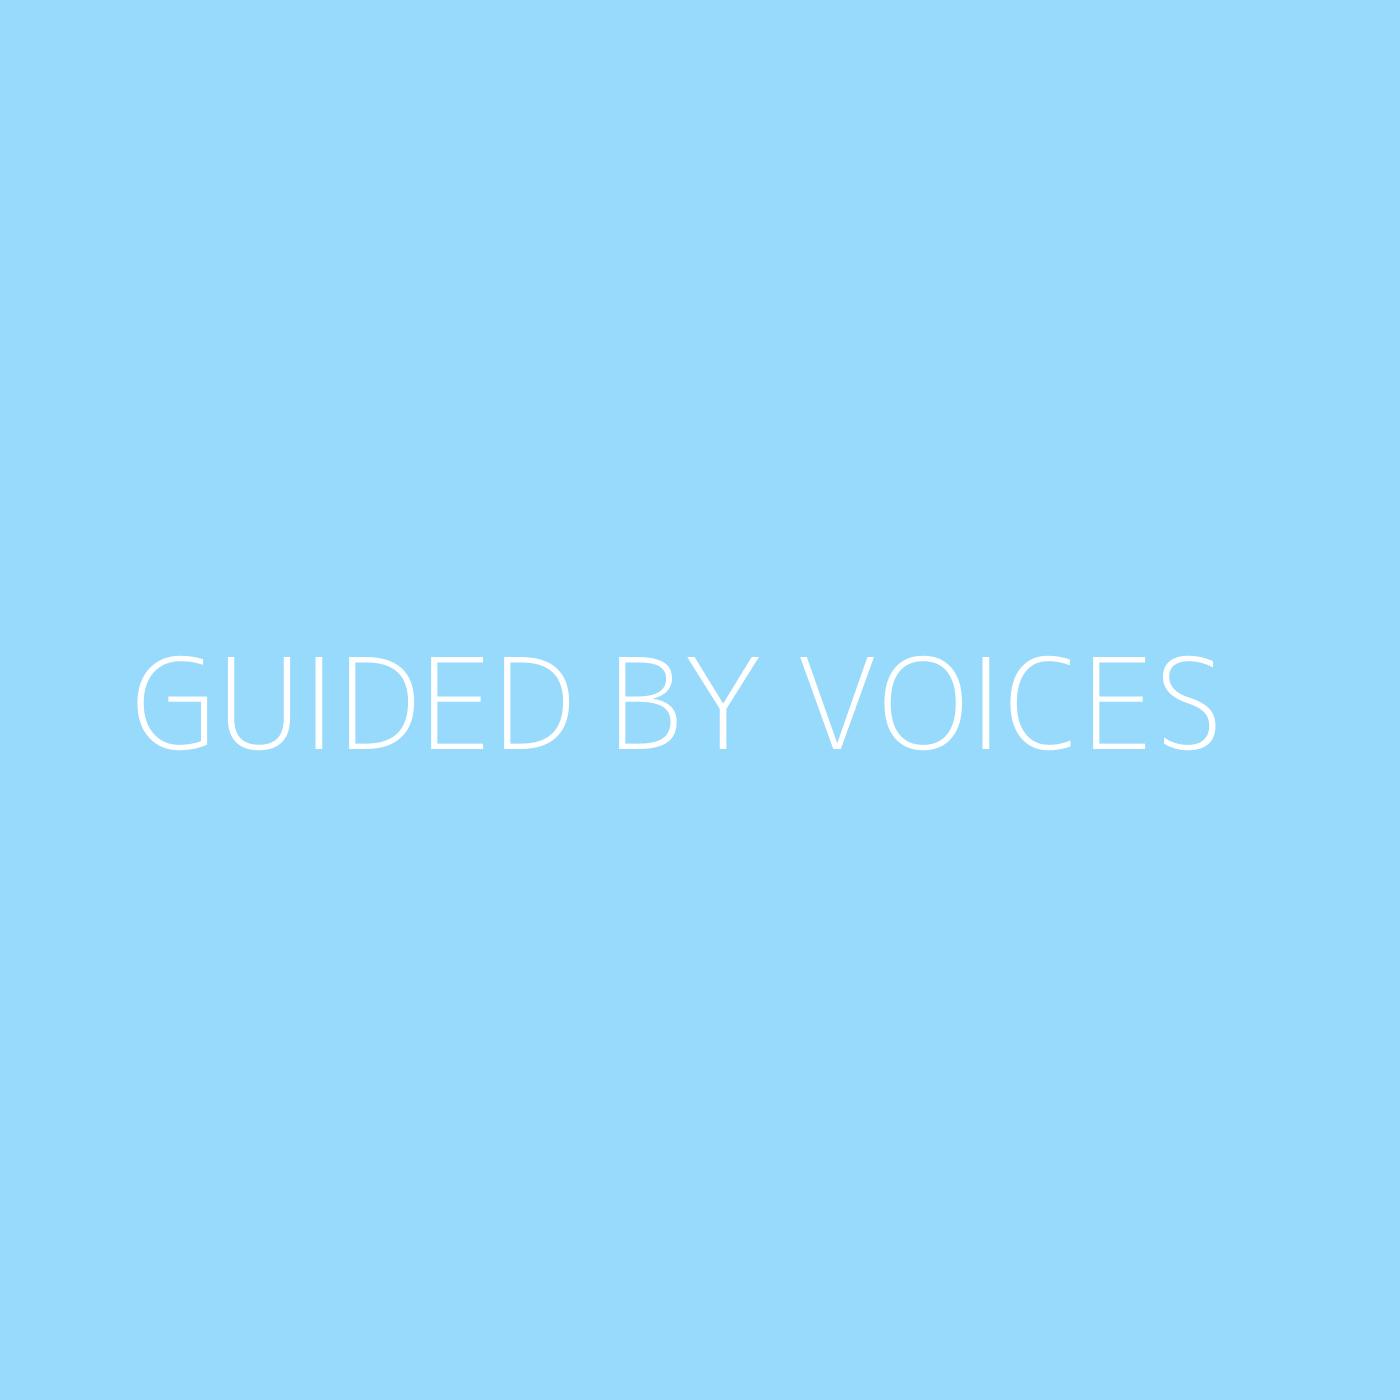 Música 02 - Guided by Voices - Smothered in Hugs